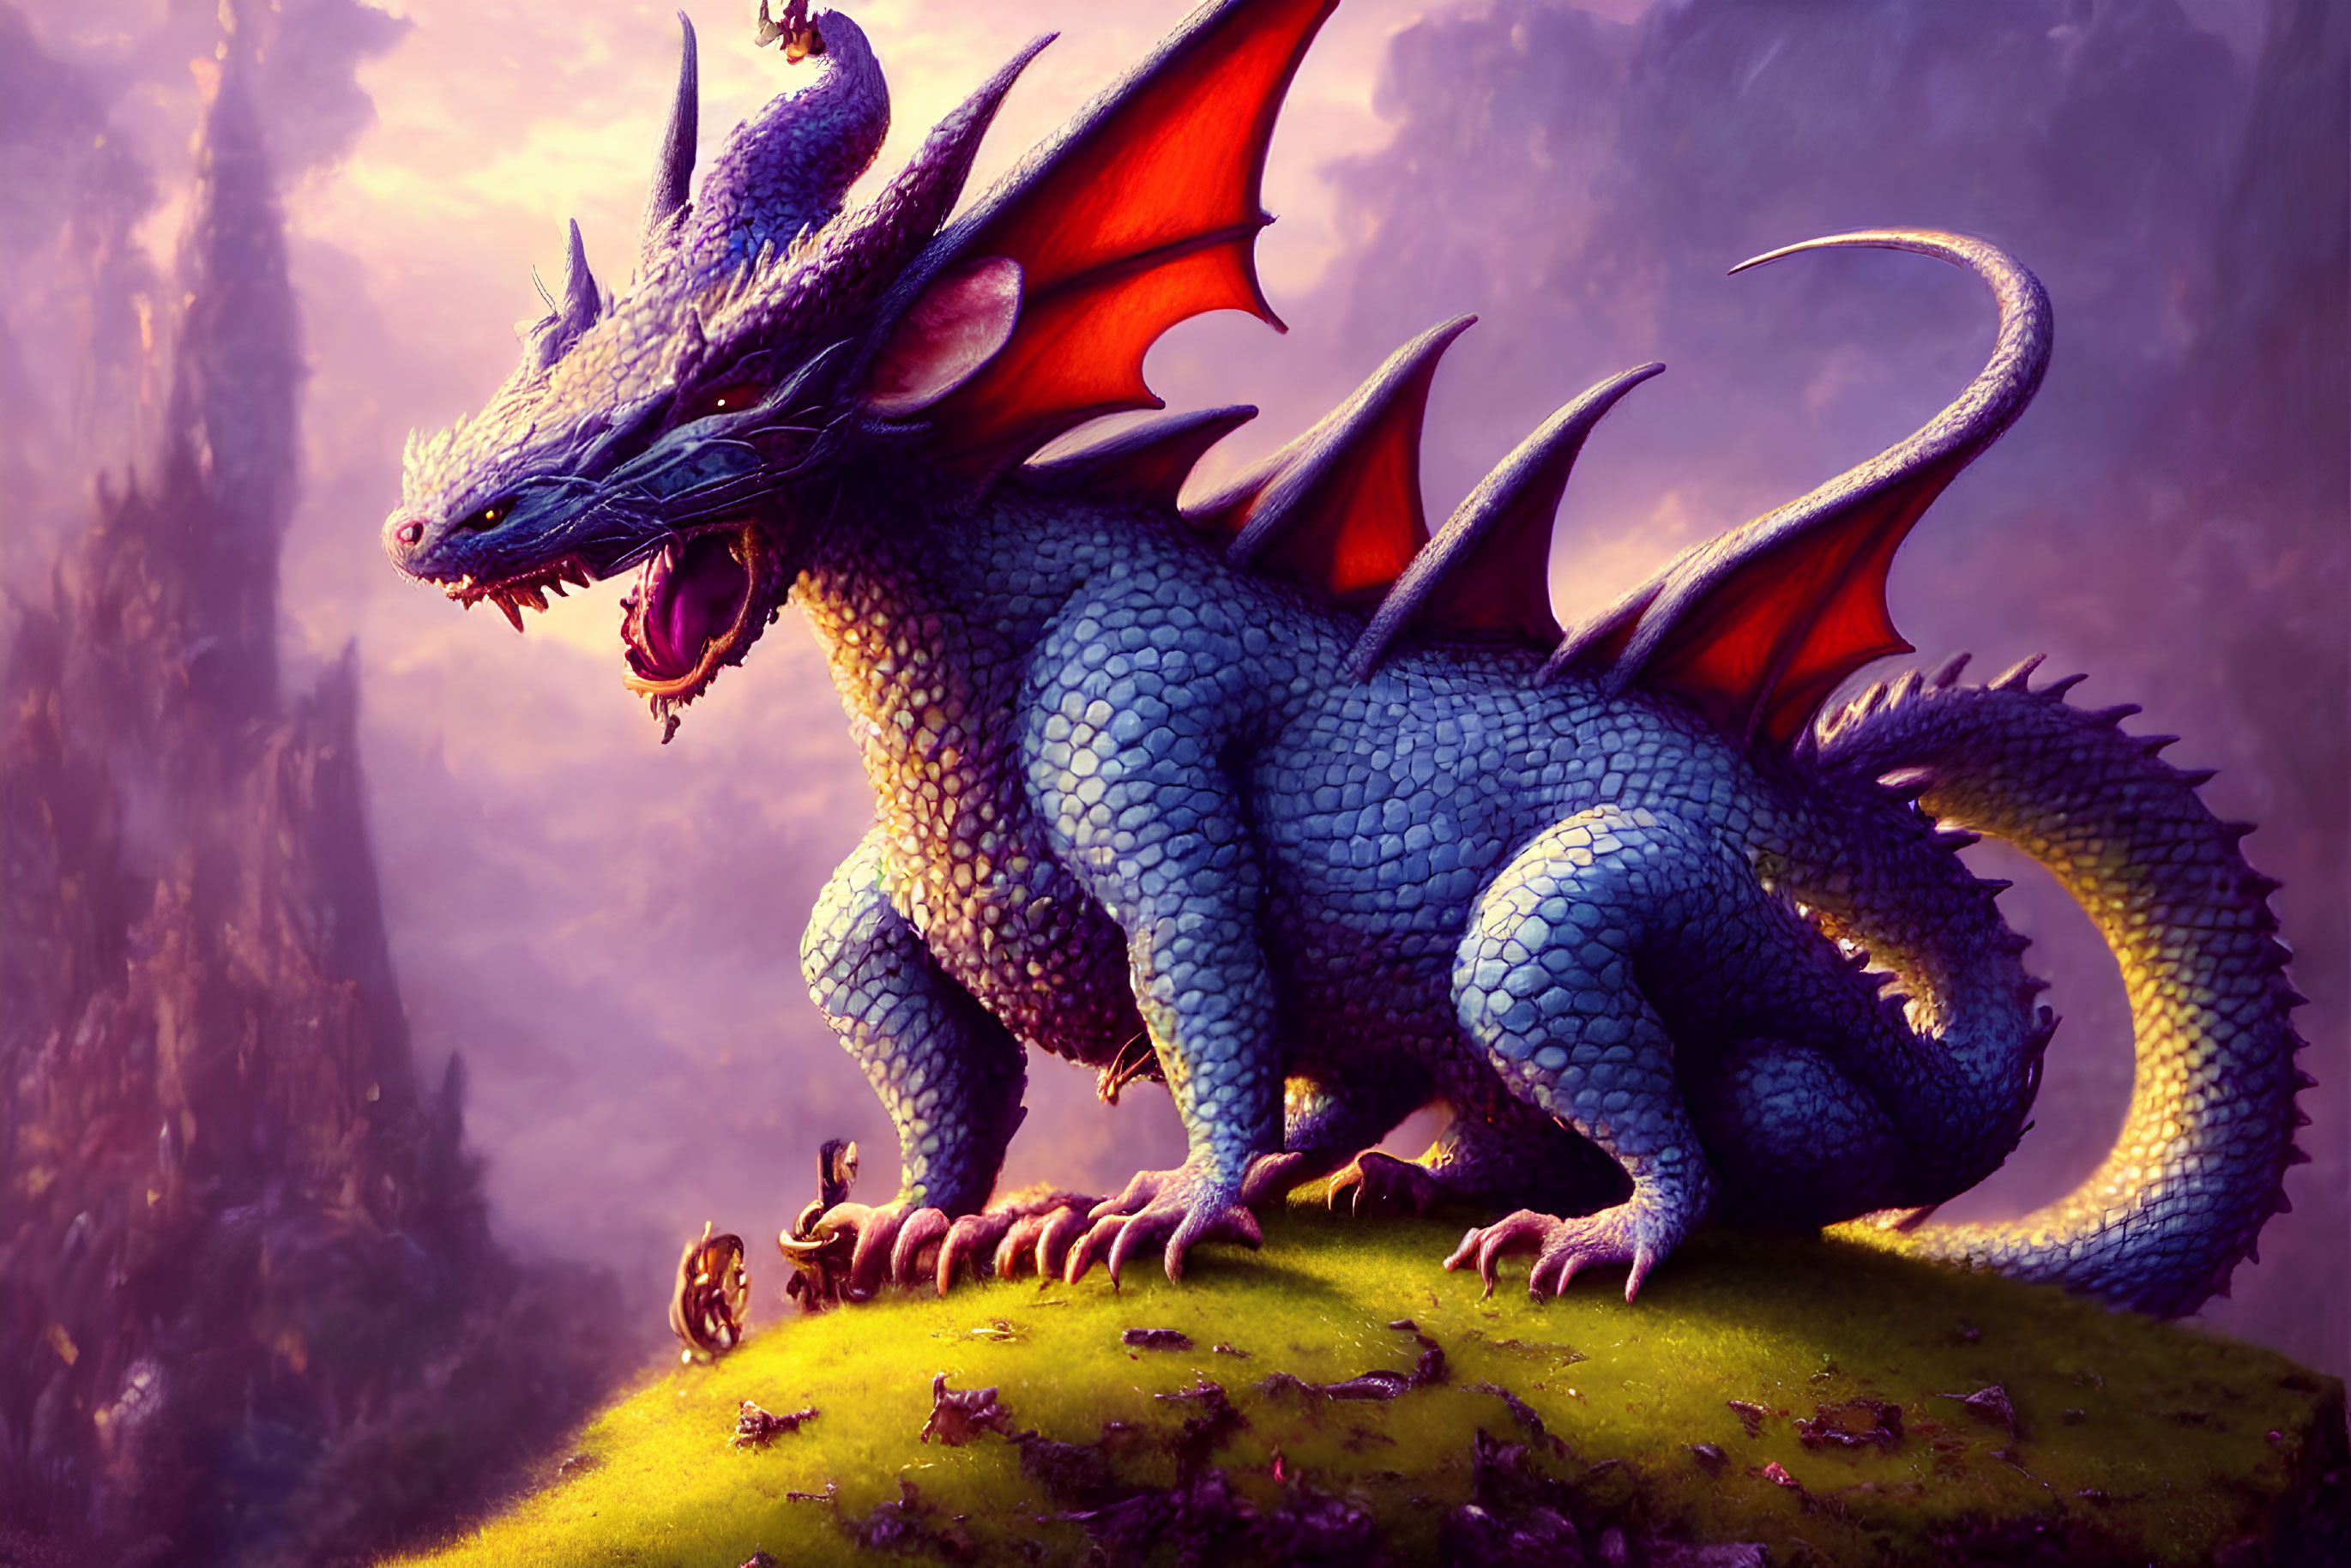 Blue-scaled Dragon with Red Wings on Hill in Mystical Forest